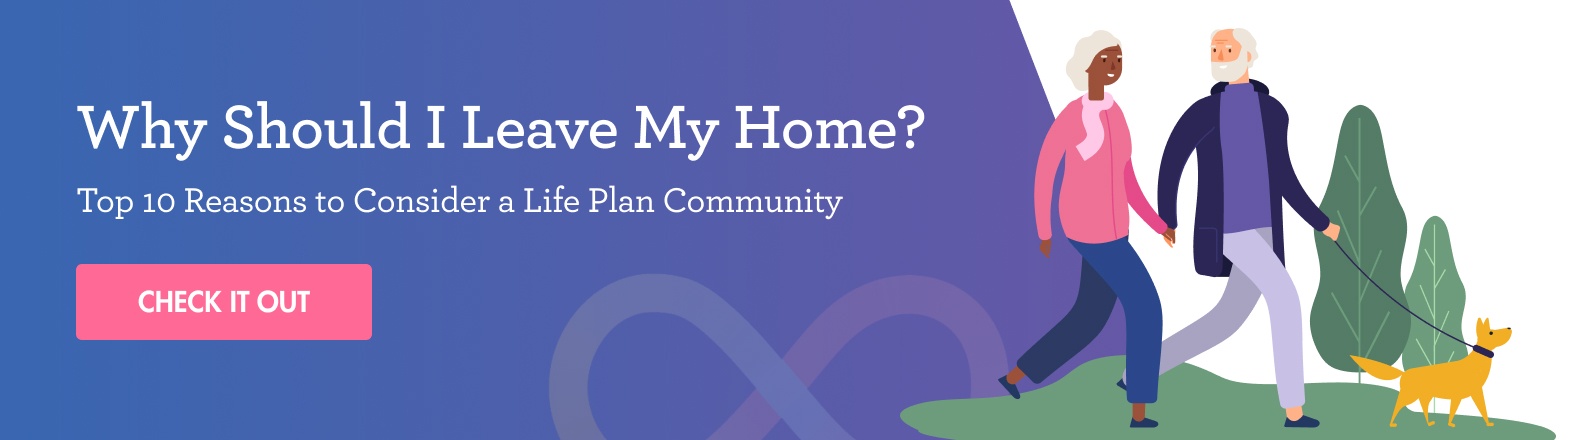 Why Should I Leave My Home? guide